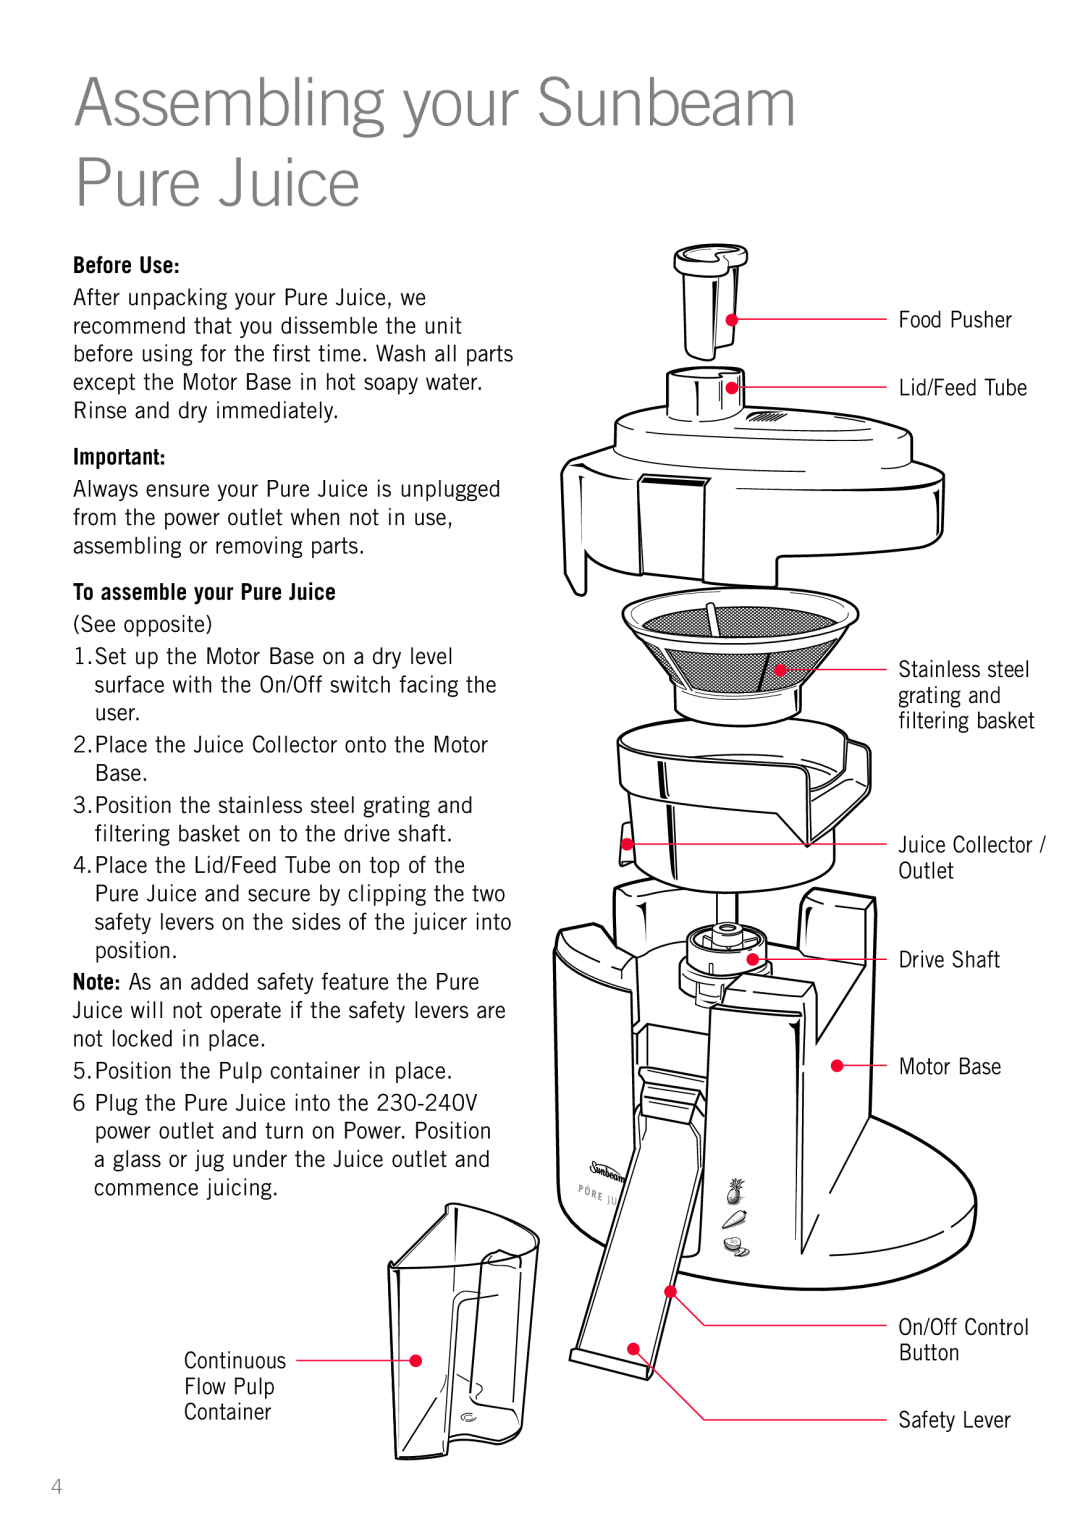 Sunbeam JE4700 manual Assembling your Sunbeam Pure Juice, Before Use, To assemble your Pure Juice 